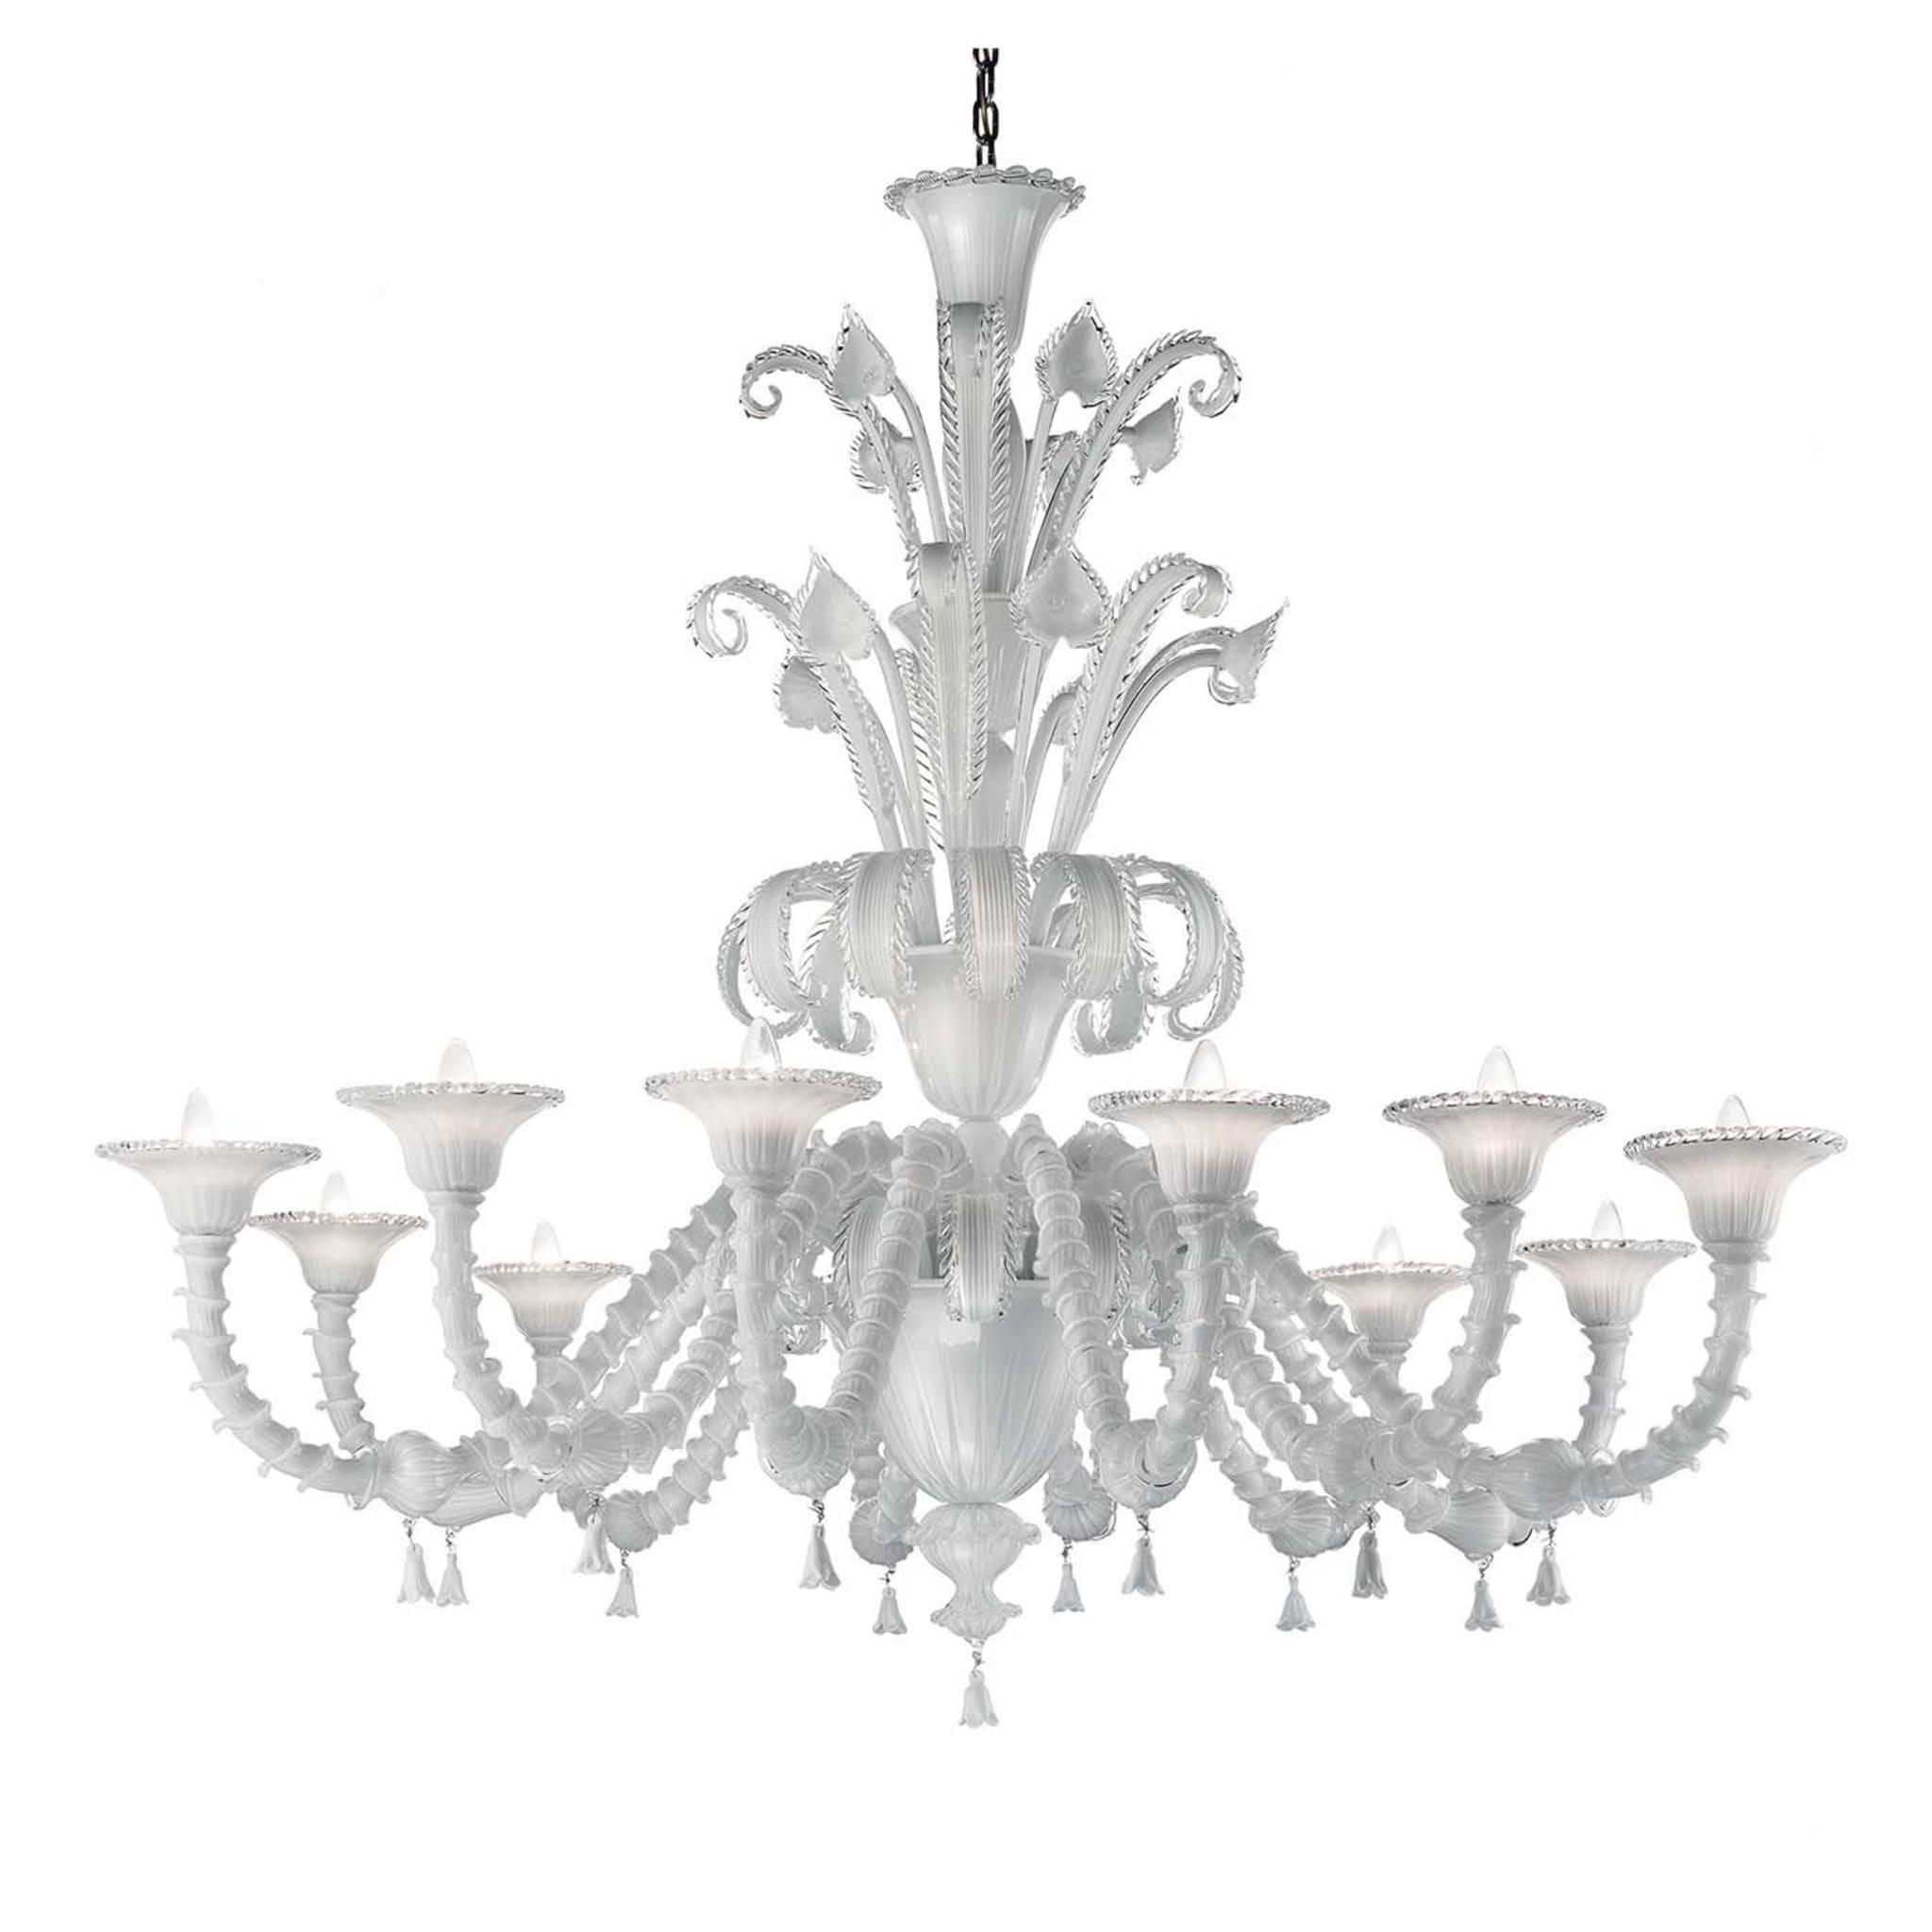 Calle Cortina Chandelier - Main view